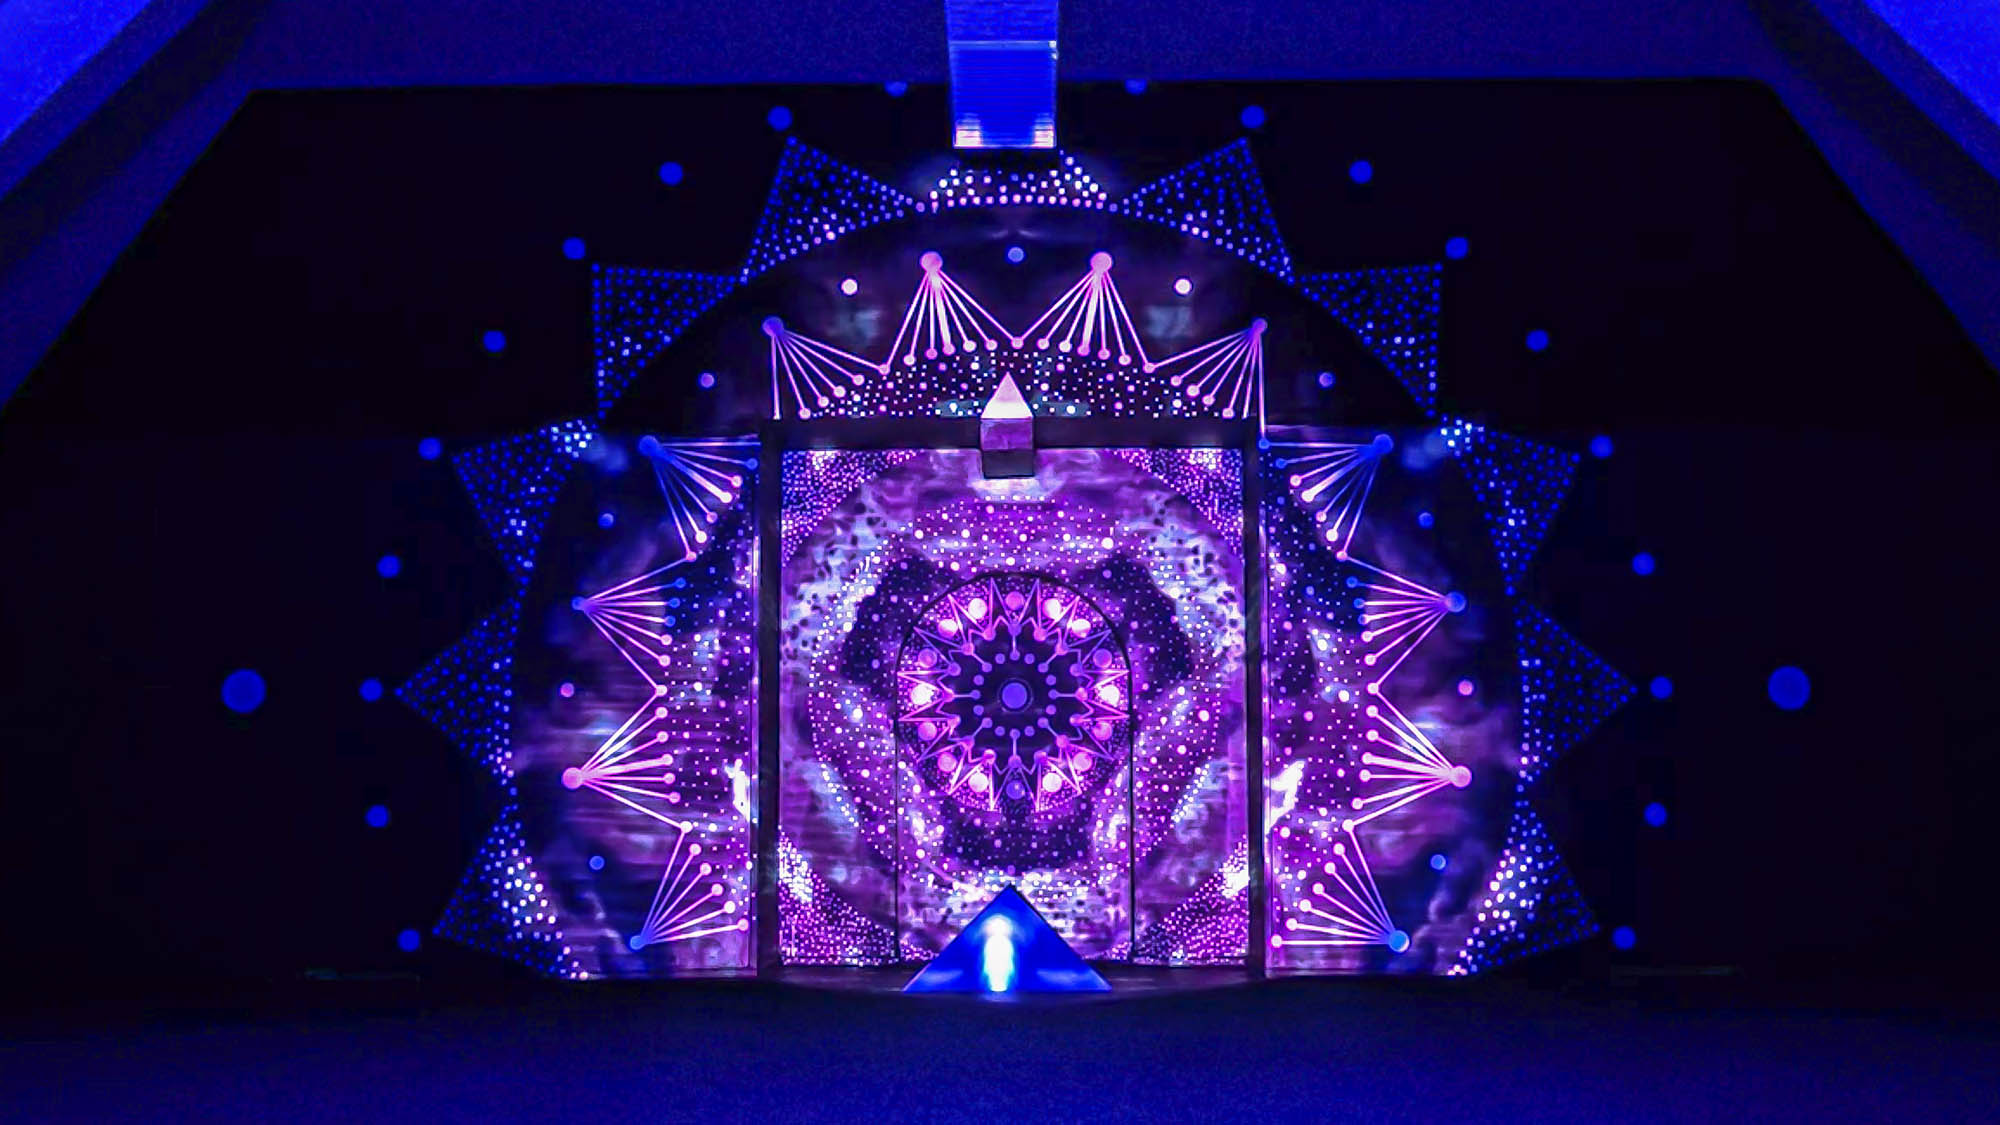 Image of a video art installation combined with a mural painting. Mandala geometric design with projection mapping art. Light artist philipp frank